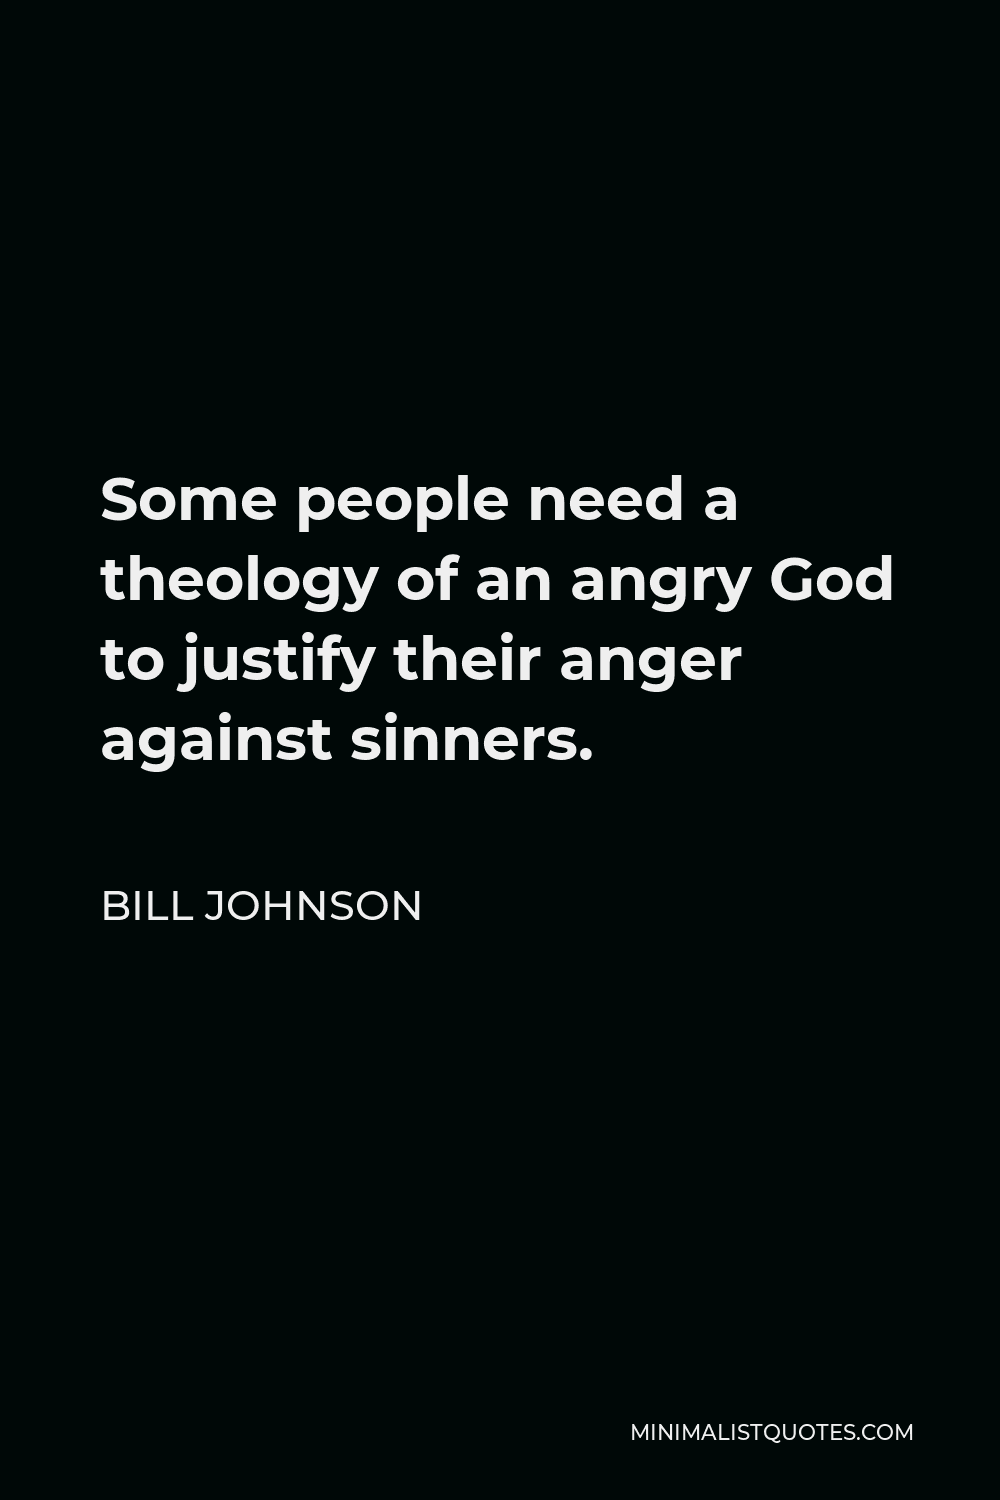 Bill Johnson Quote - Some people need a theology of an angry God to justify their anger against sinners.